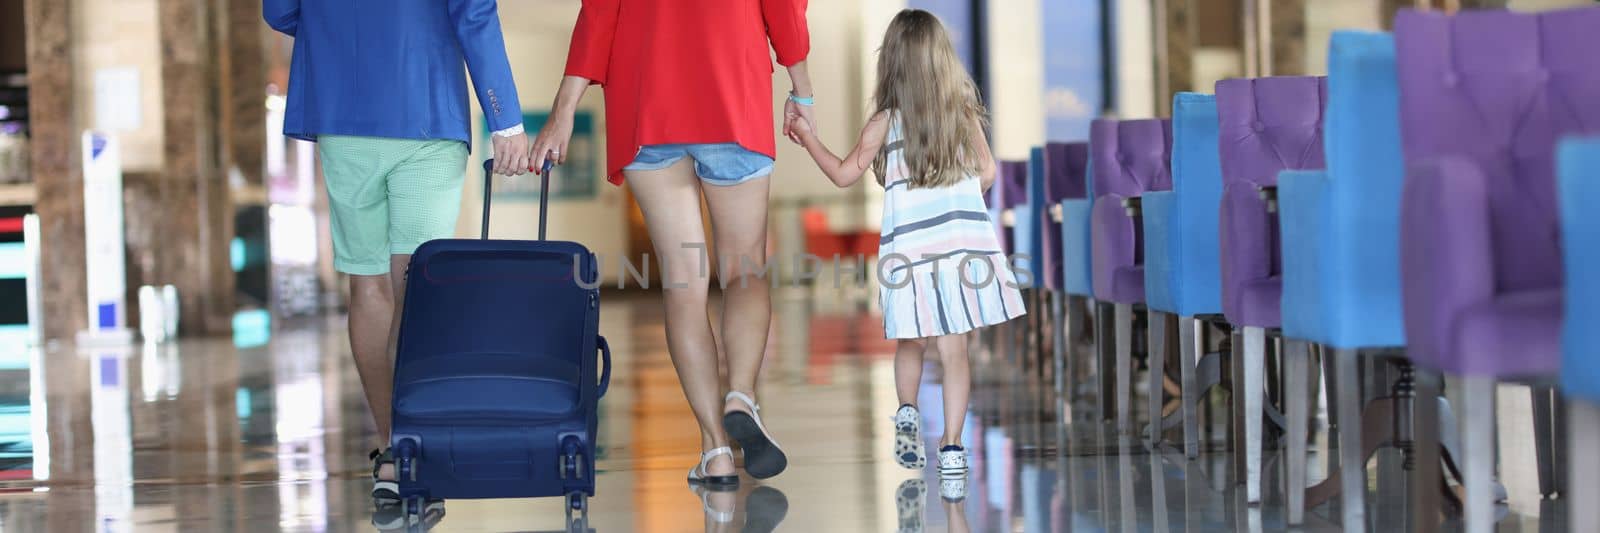 Rear view of family with suitcase while walking in airport or hotel. Parents and little daughter holding hands walking with luggage to boarding gate concept